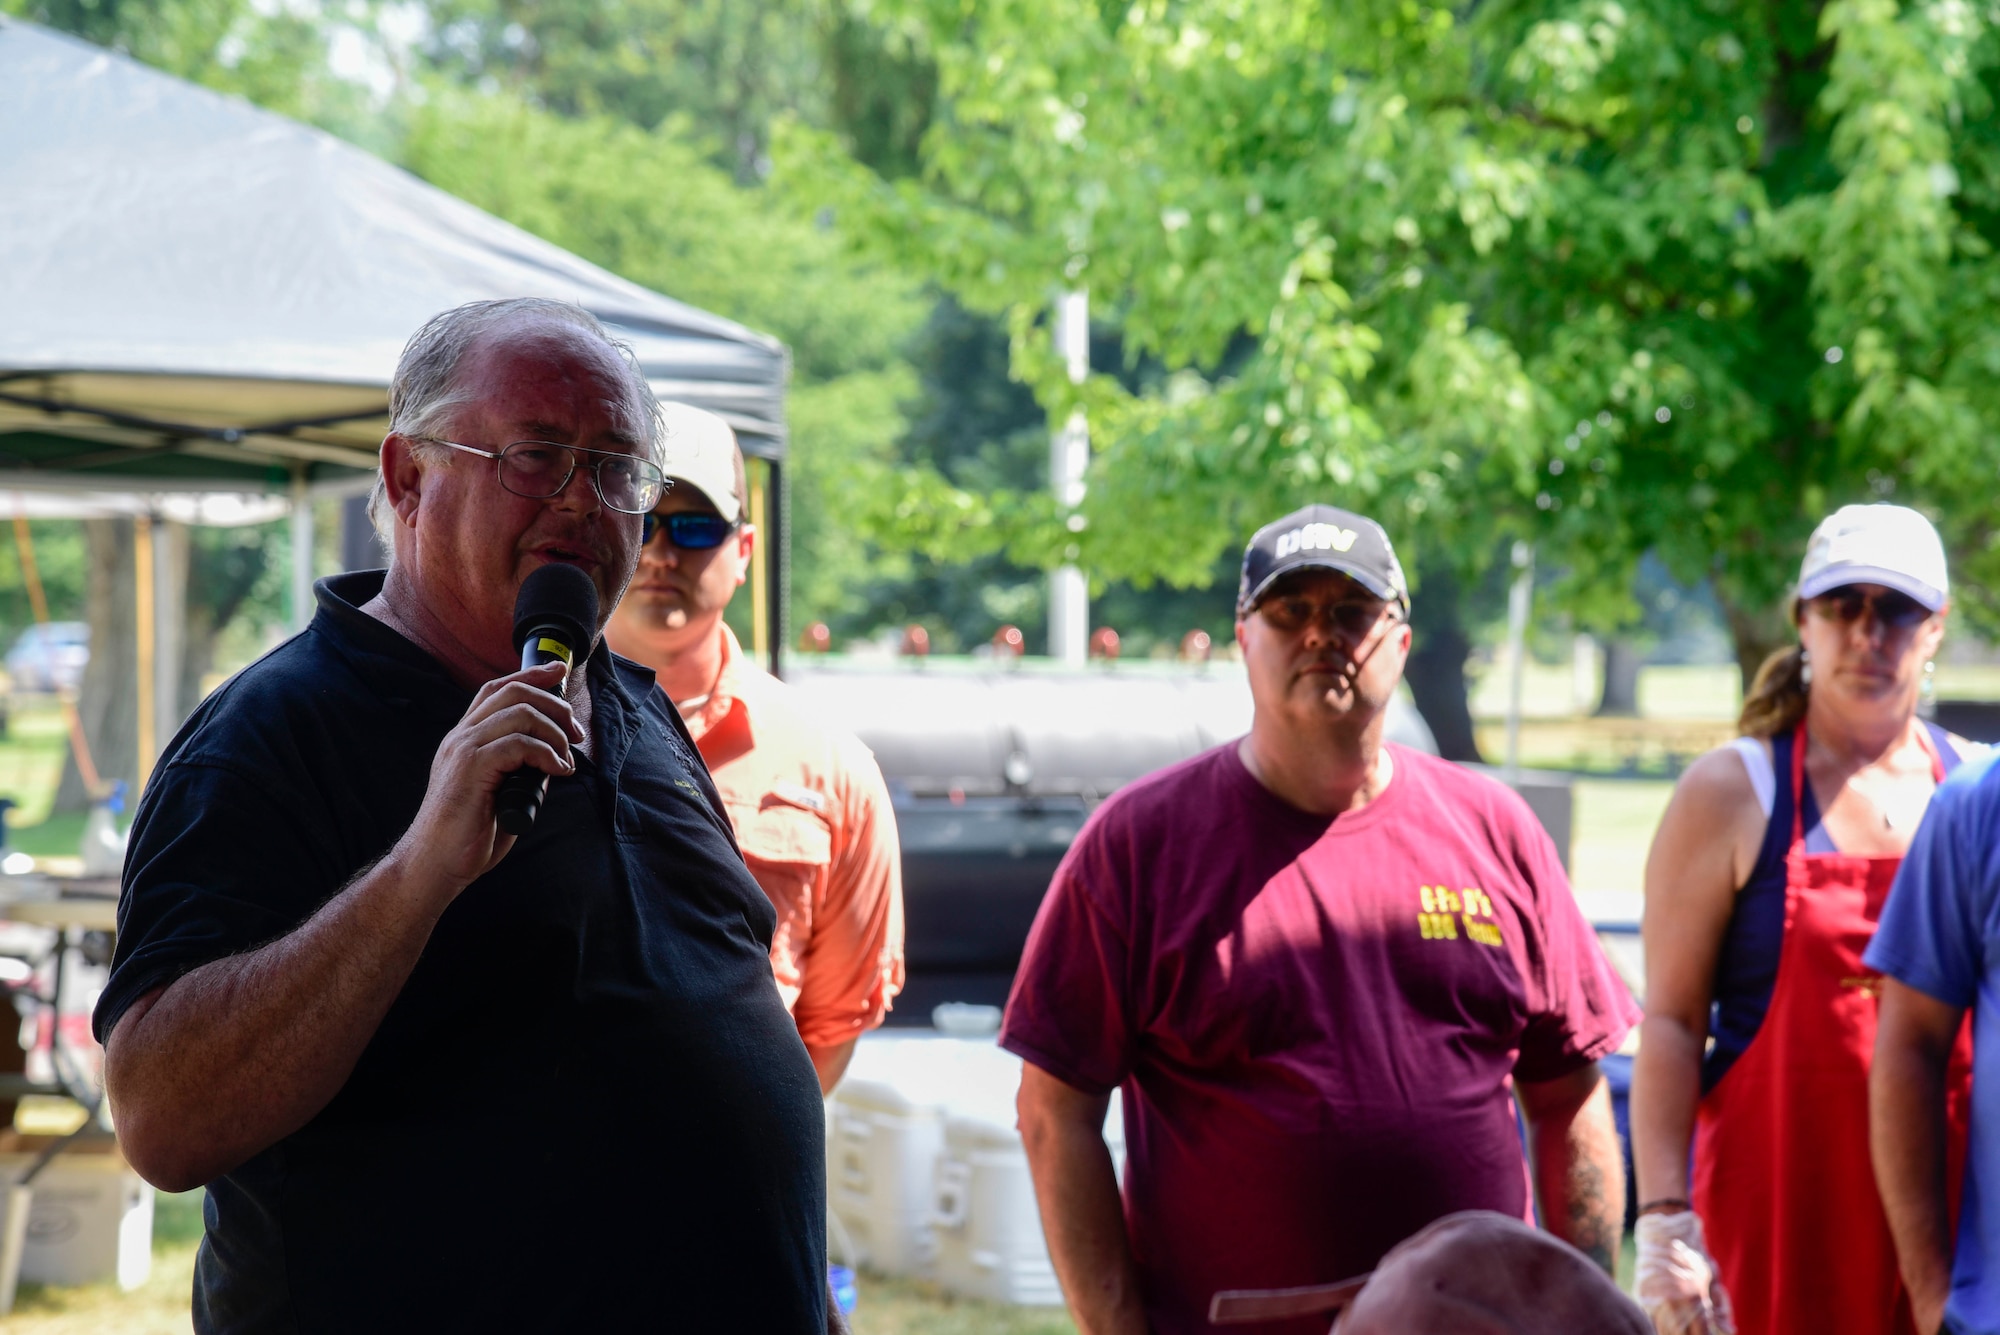 ‘Uncle’ Leroy Payne, local Spokane pit master, speaks with Airmen July 28, 2018, at Fairchild Air Force Base, Washington. Payne and his team composed of military veterans, their families and friends, cooked more than 150 smoked rib racks, 300 pounds of pulled pork and various side dishes to show appreciation for Fairchild Airmen. (U.S. Air Force photo/Staff Sgt. Nick Daniello)